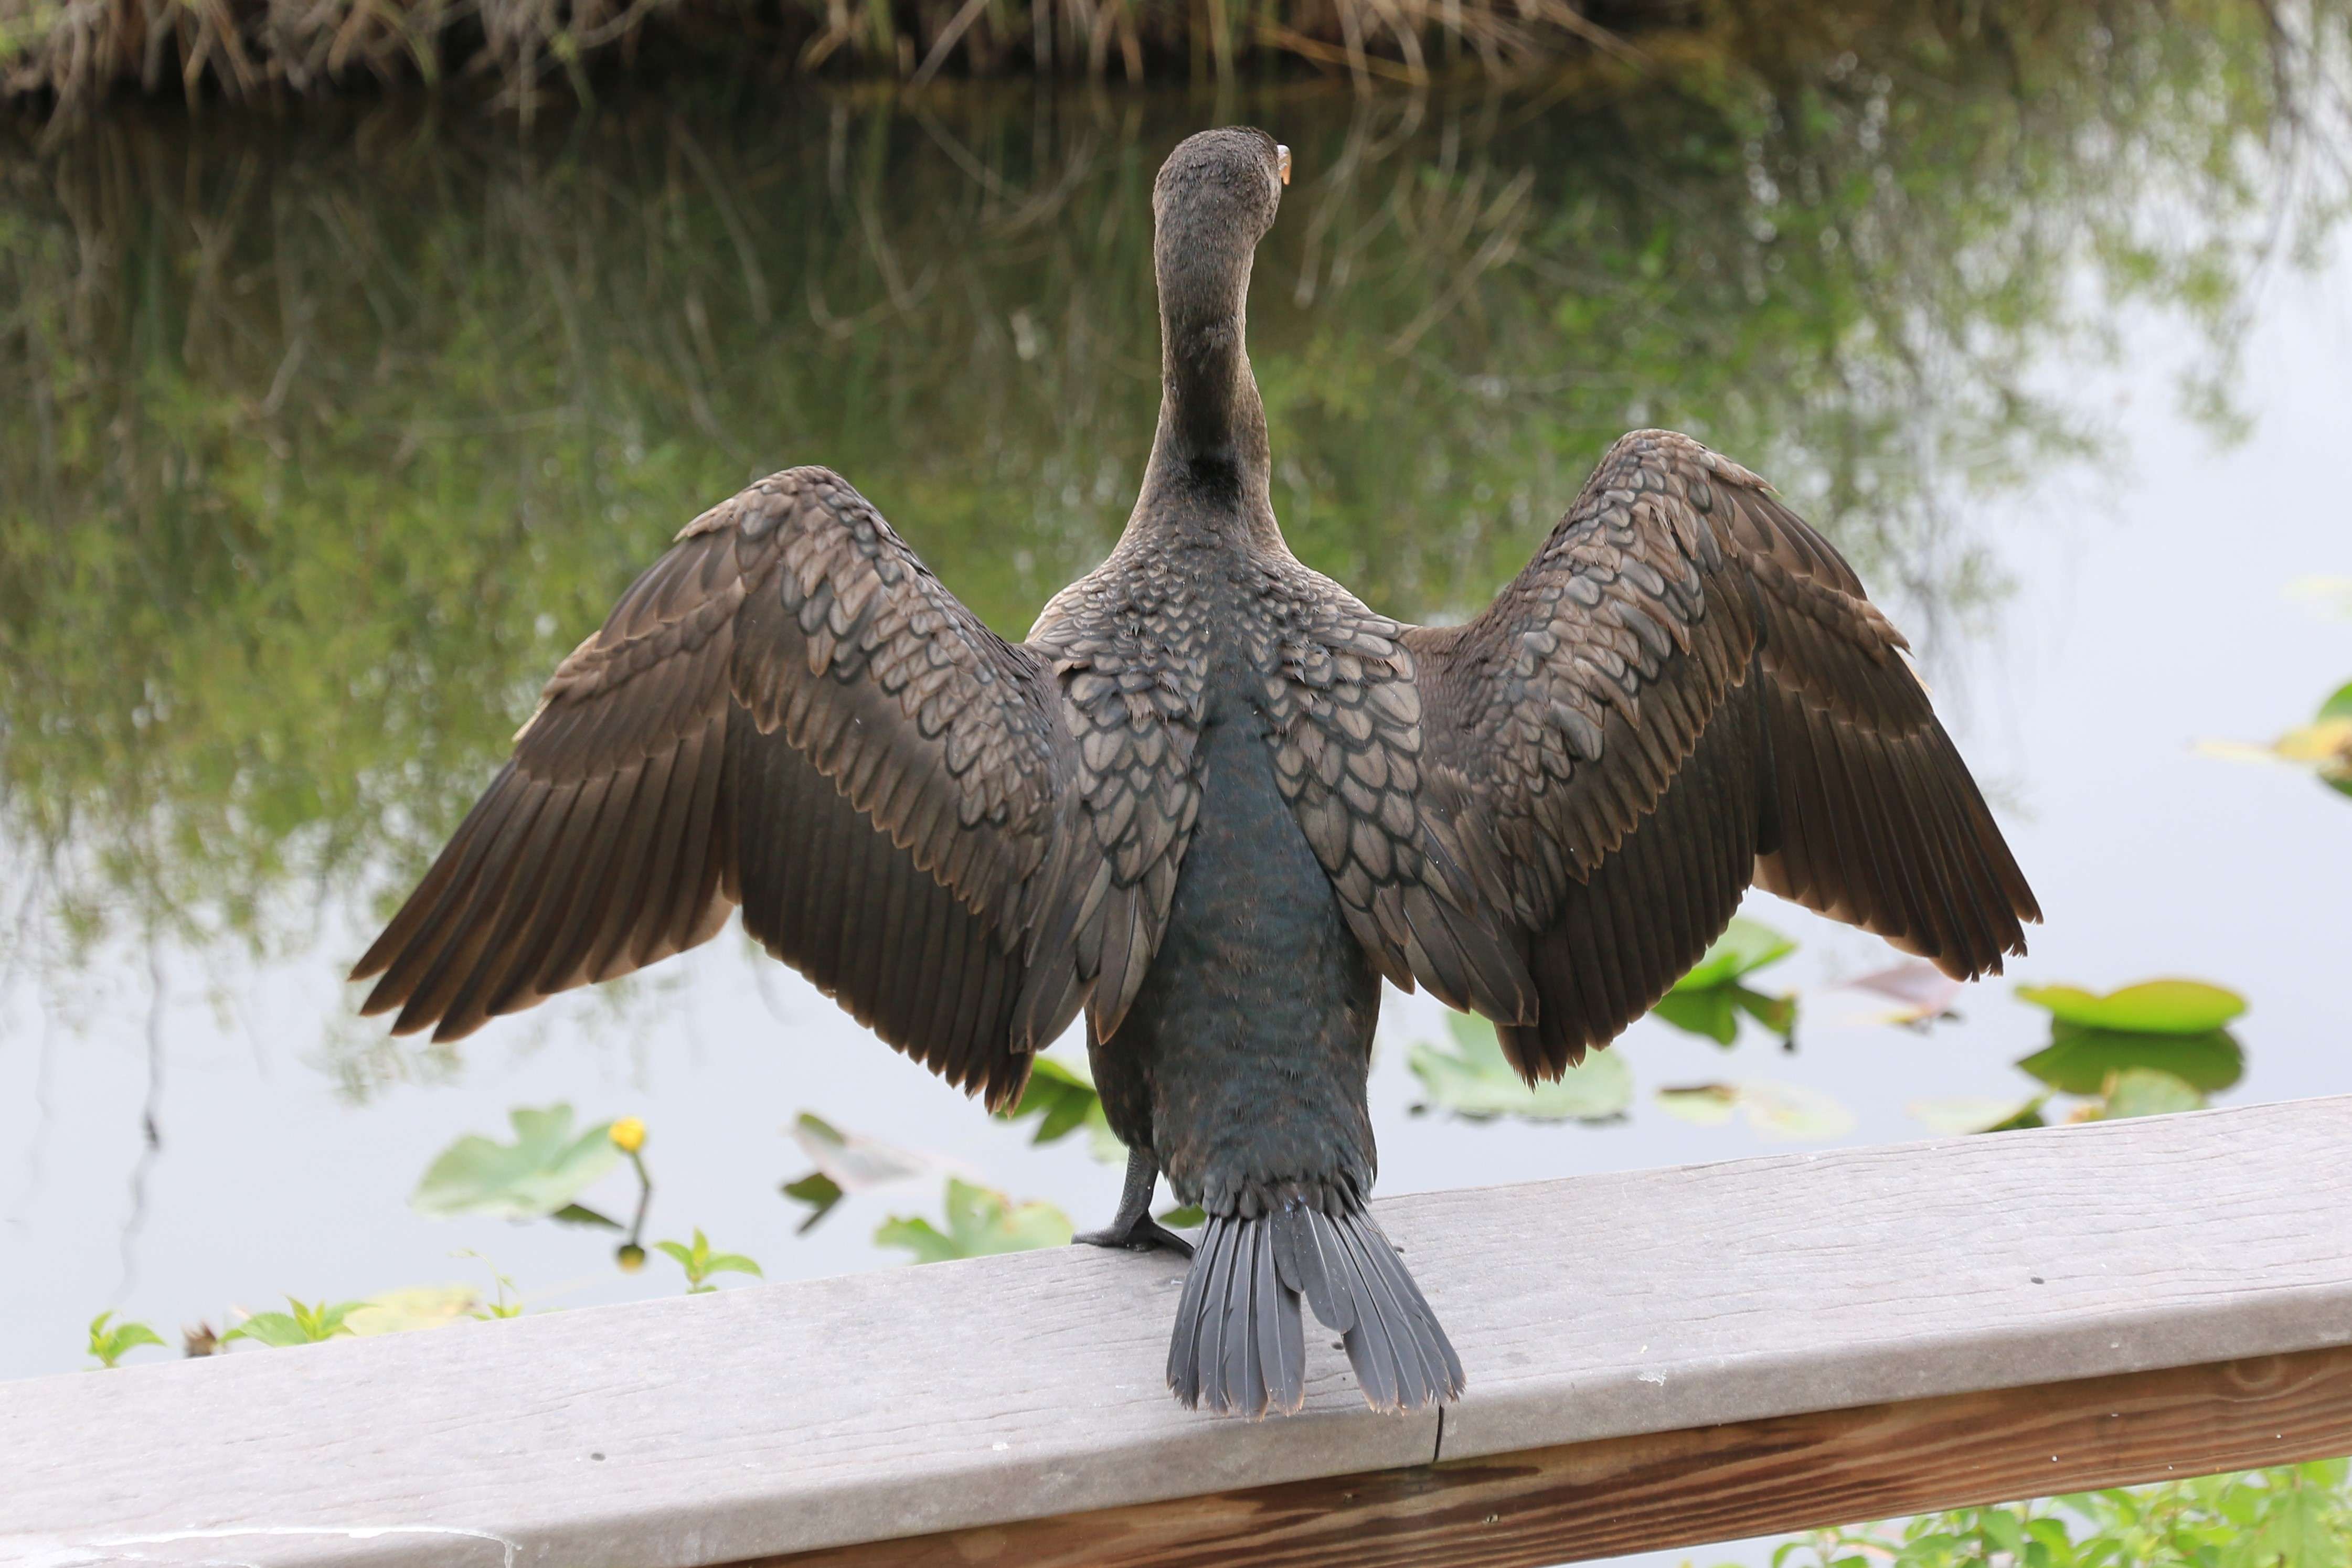 A cormorant drying her wings